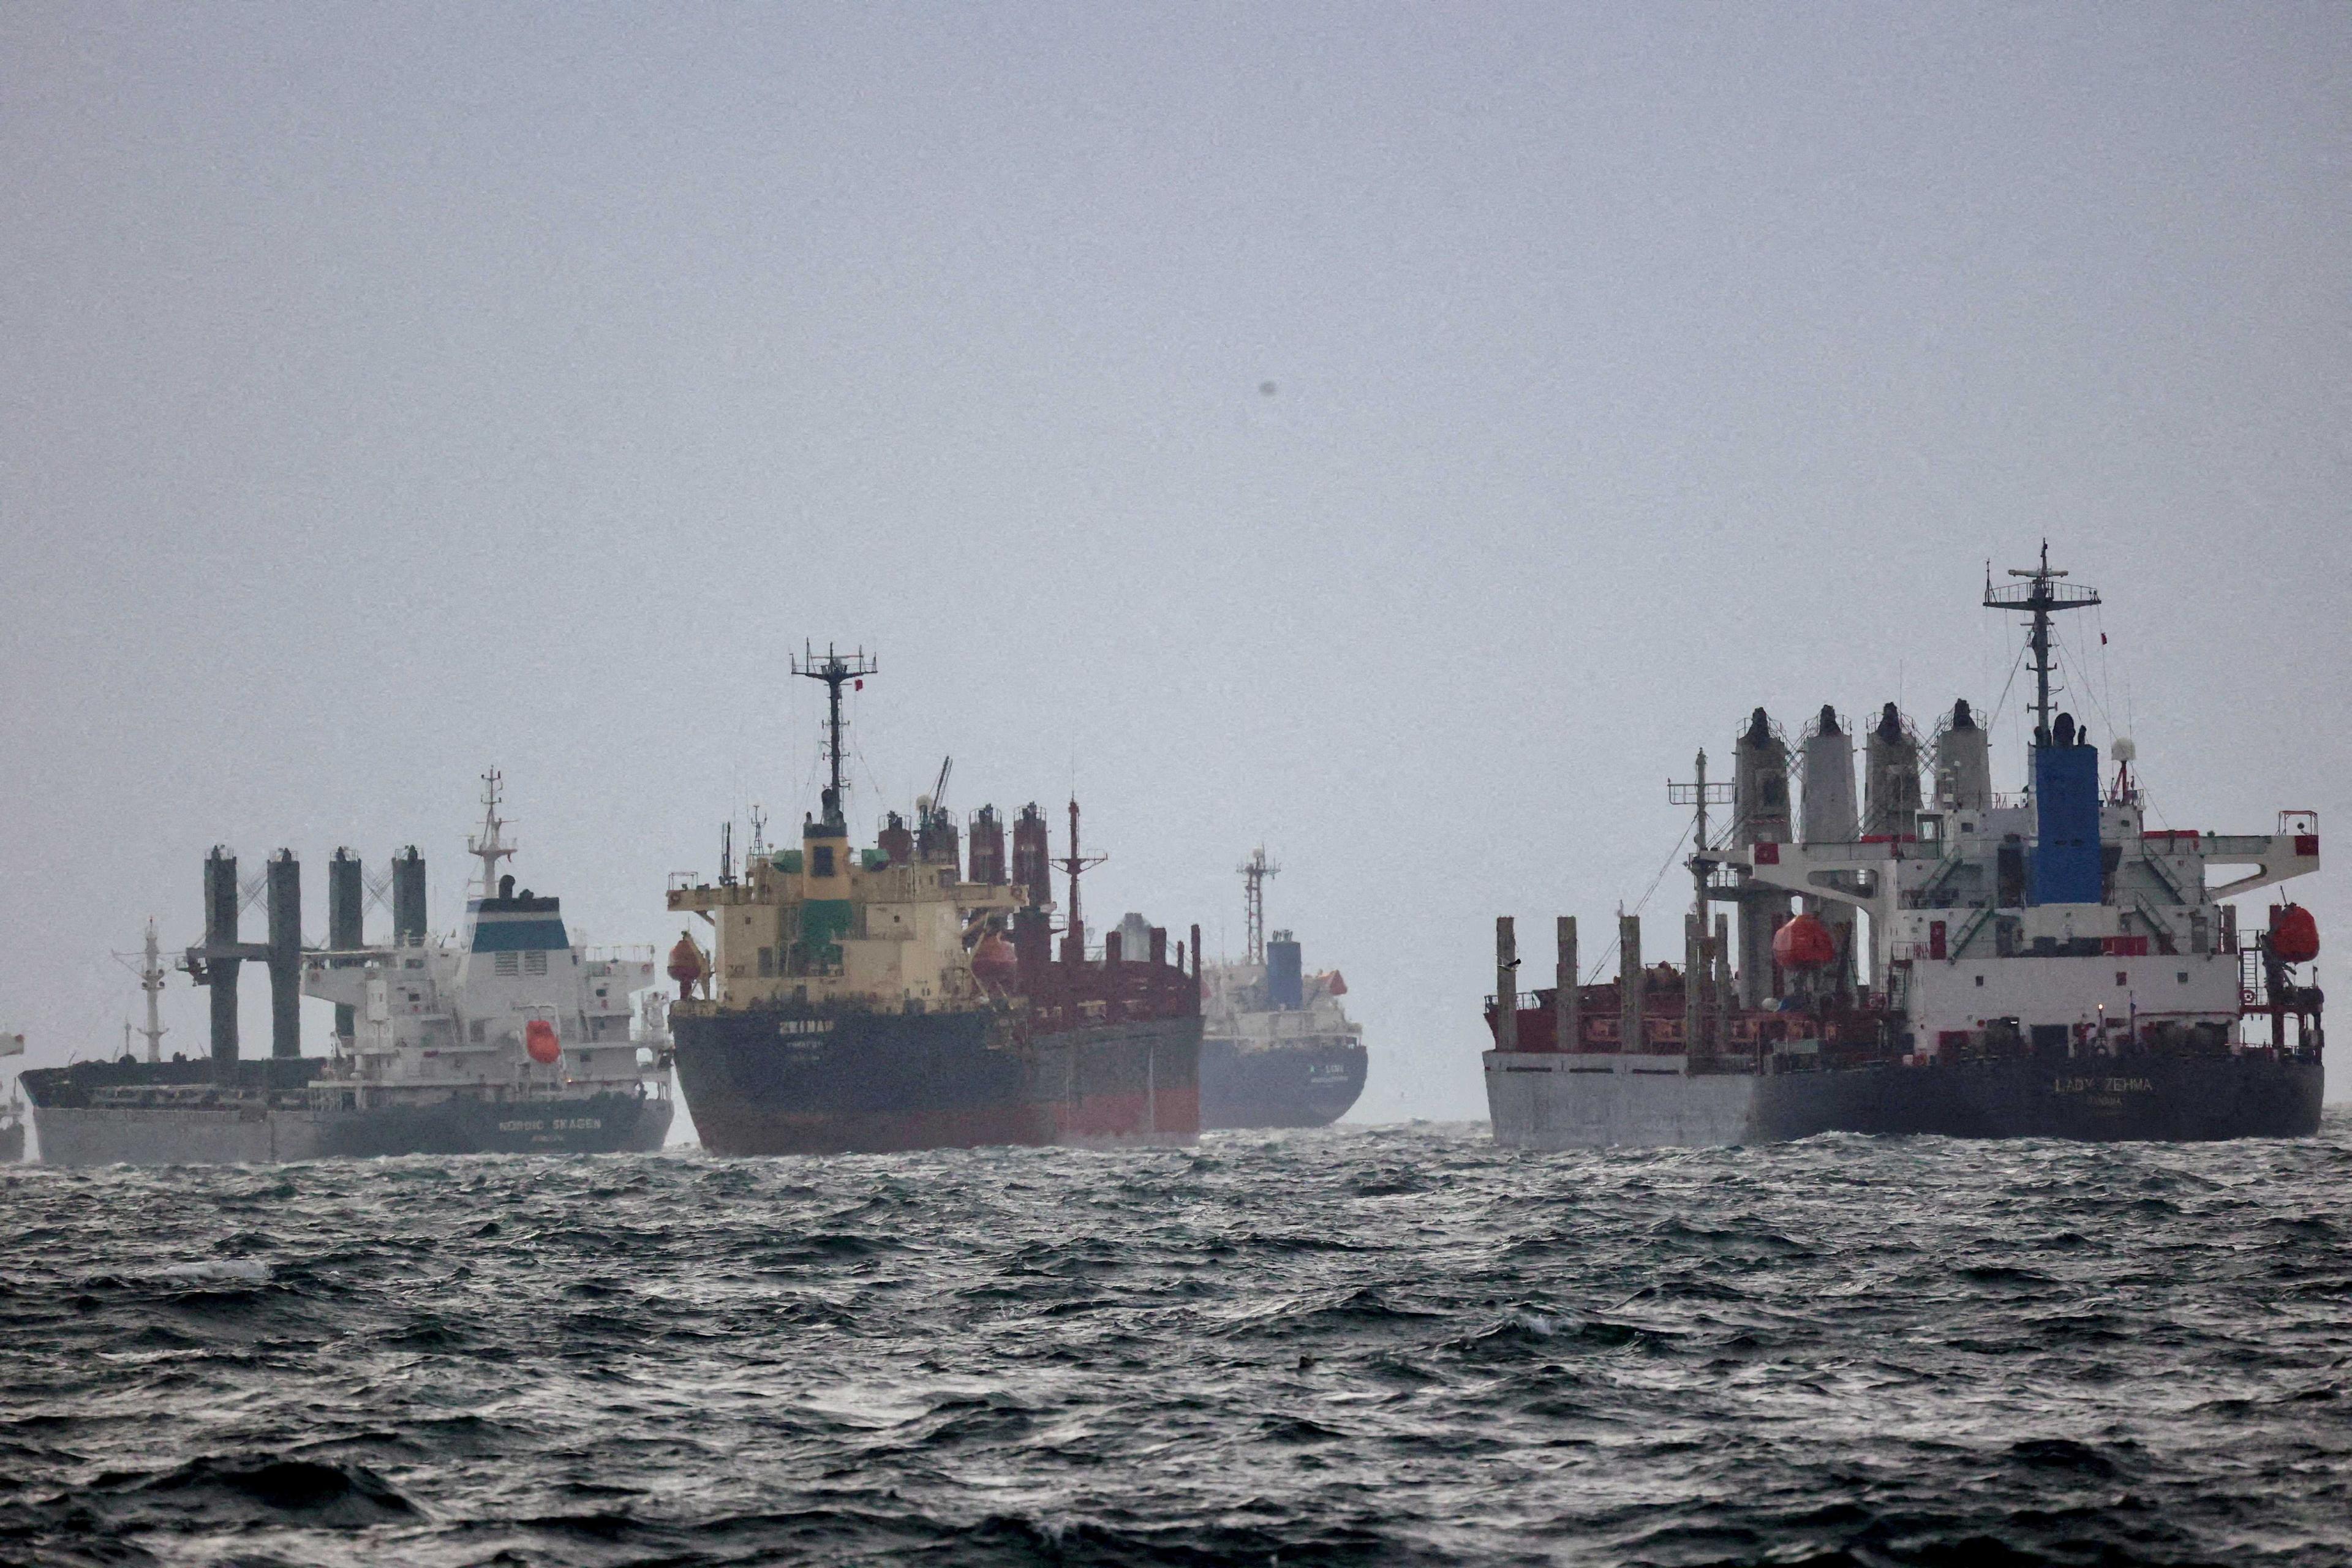 Vessels are seen as they await inspection under the Black Sea Grain Initiative, brokered by the United Nations and Turkey, in the southern anchorage of the Bosphorus in Istanbul, Turkey Dec 11, 2022. Photo: Reuters